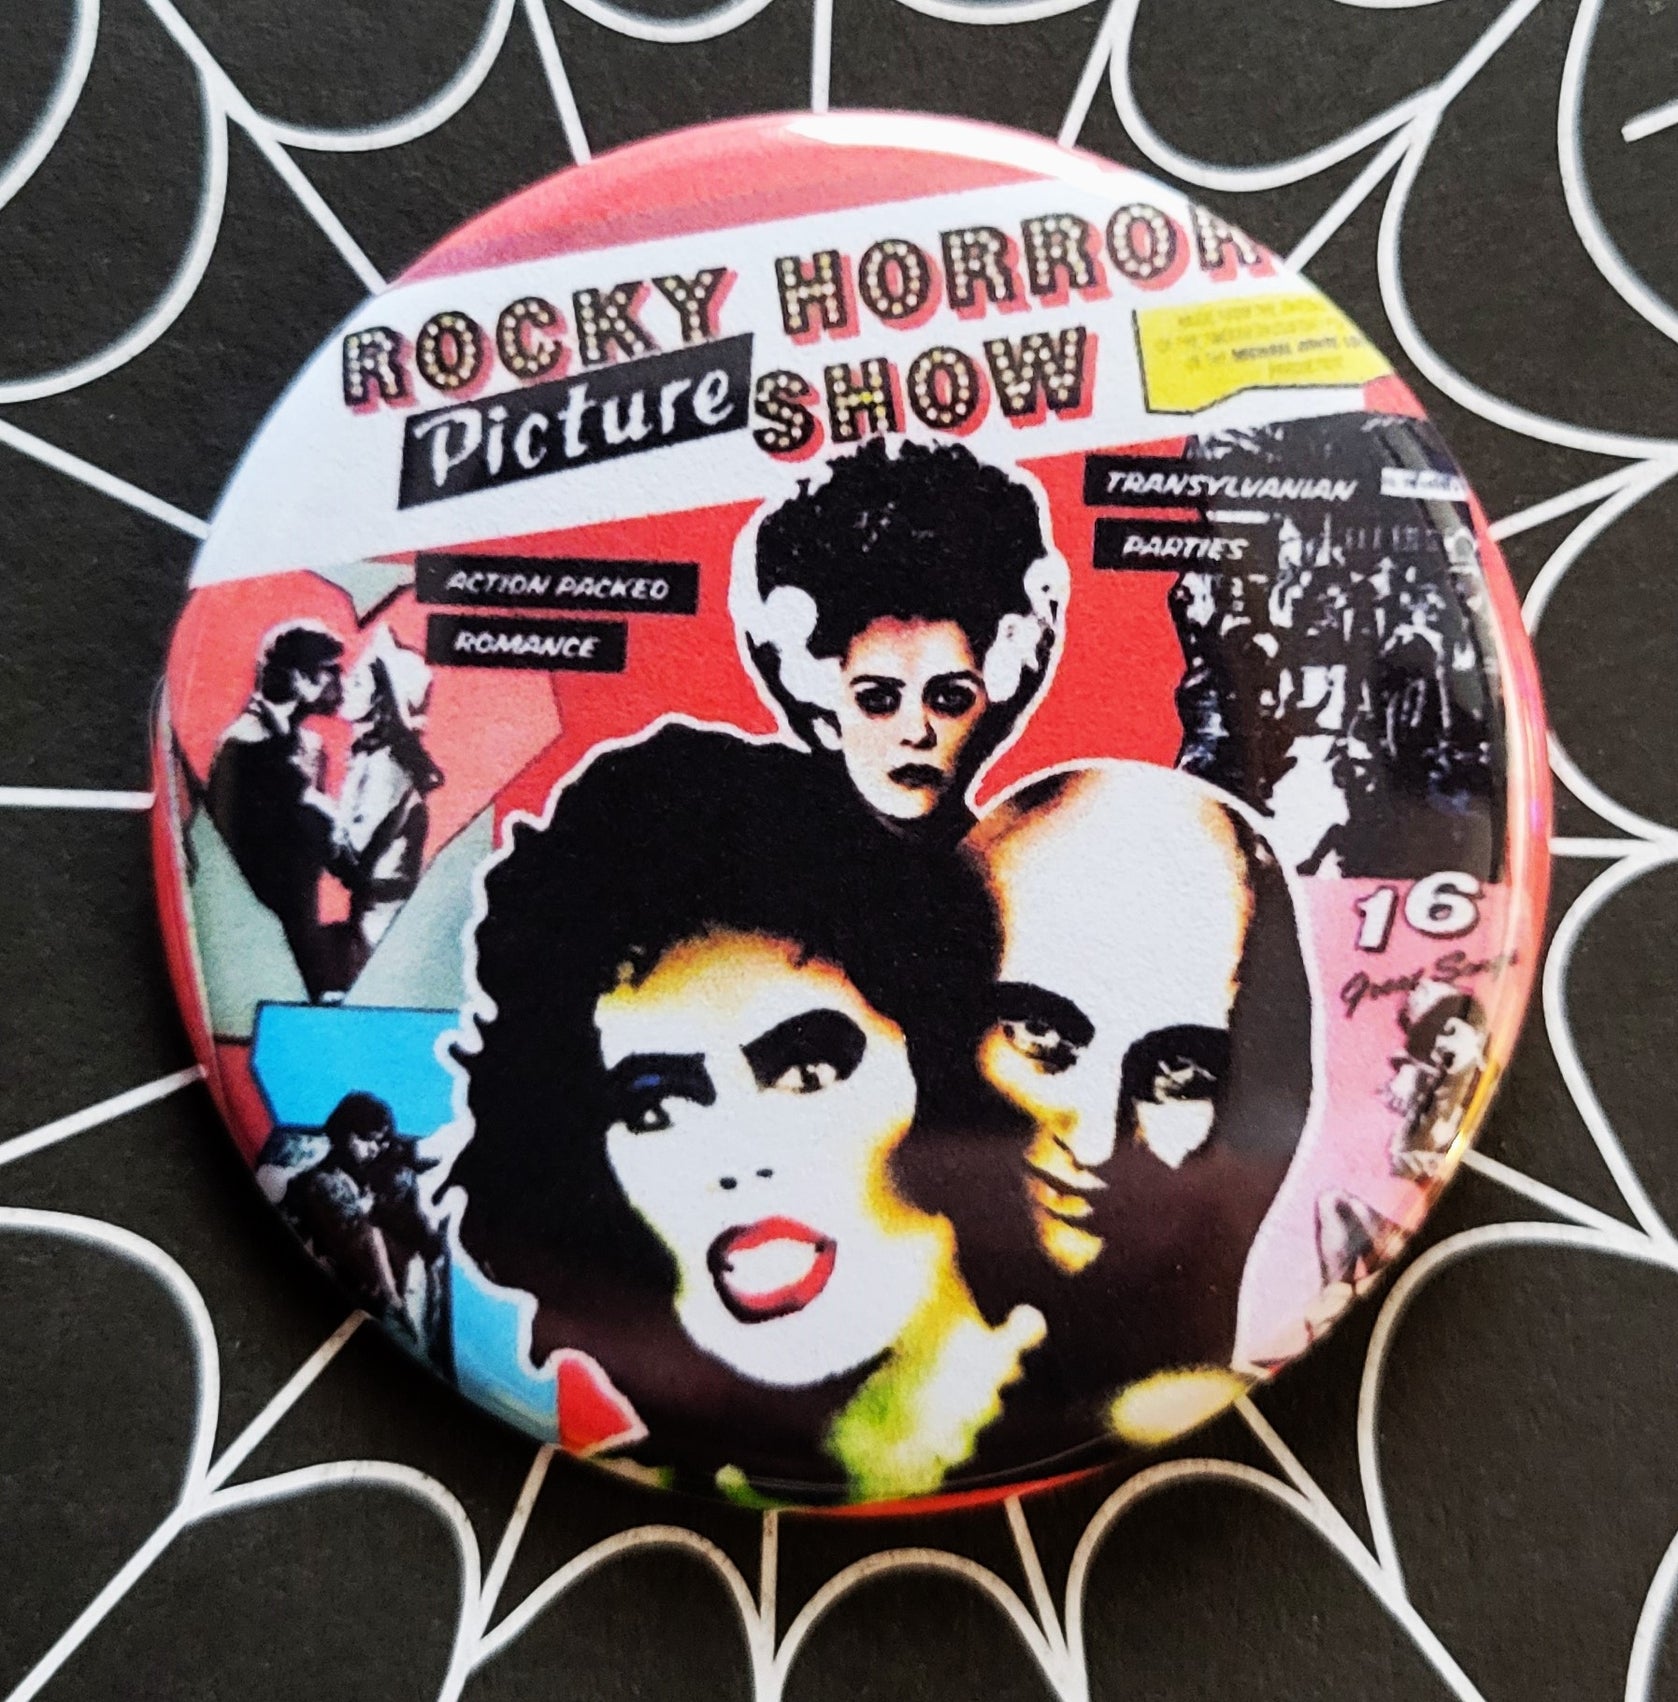 2 25” button of the colorful stylized cover art of the soundtrack album for The Rocky Horror Picture Show